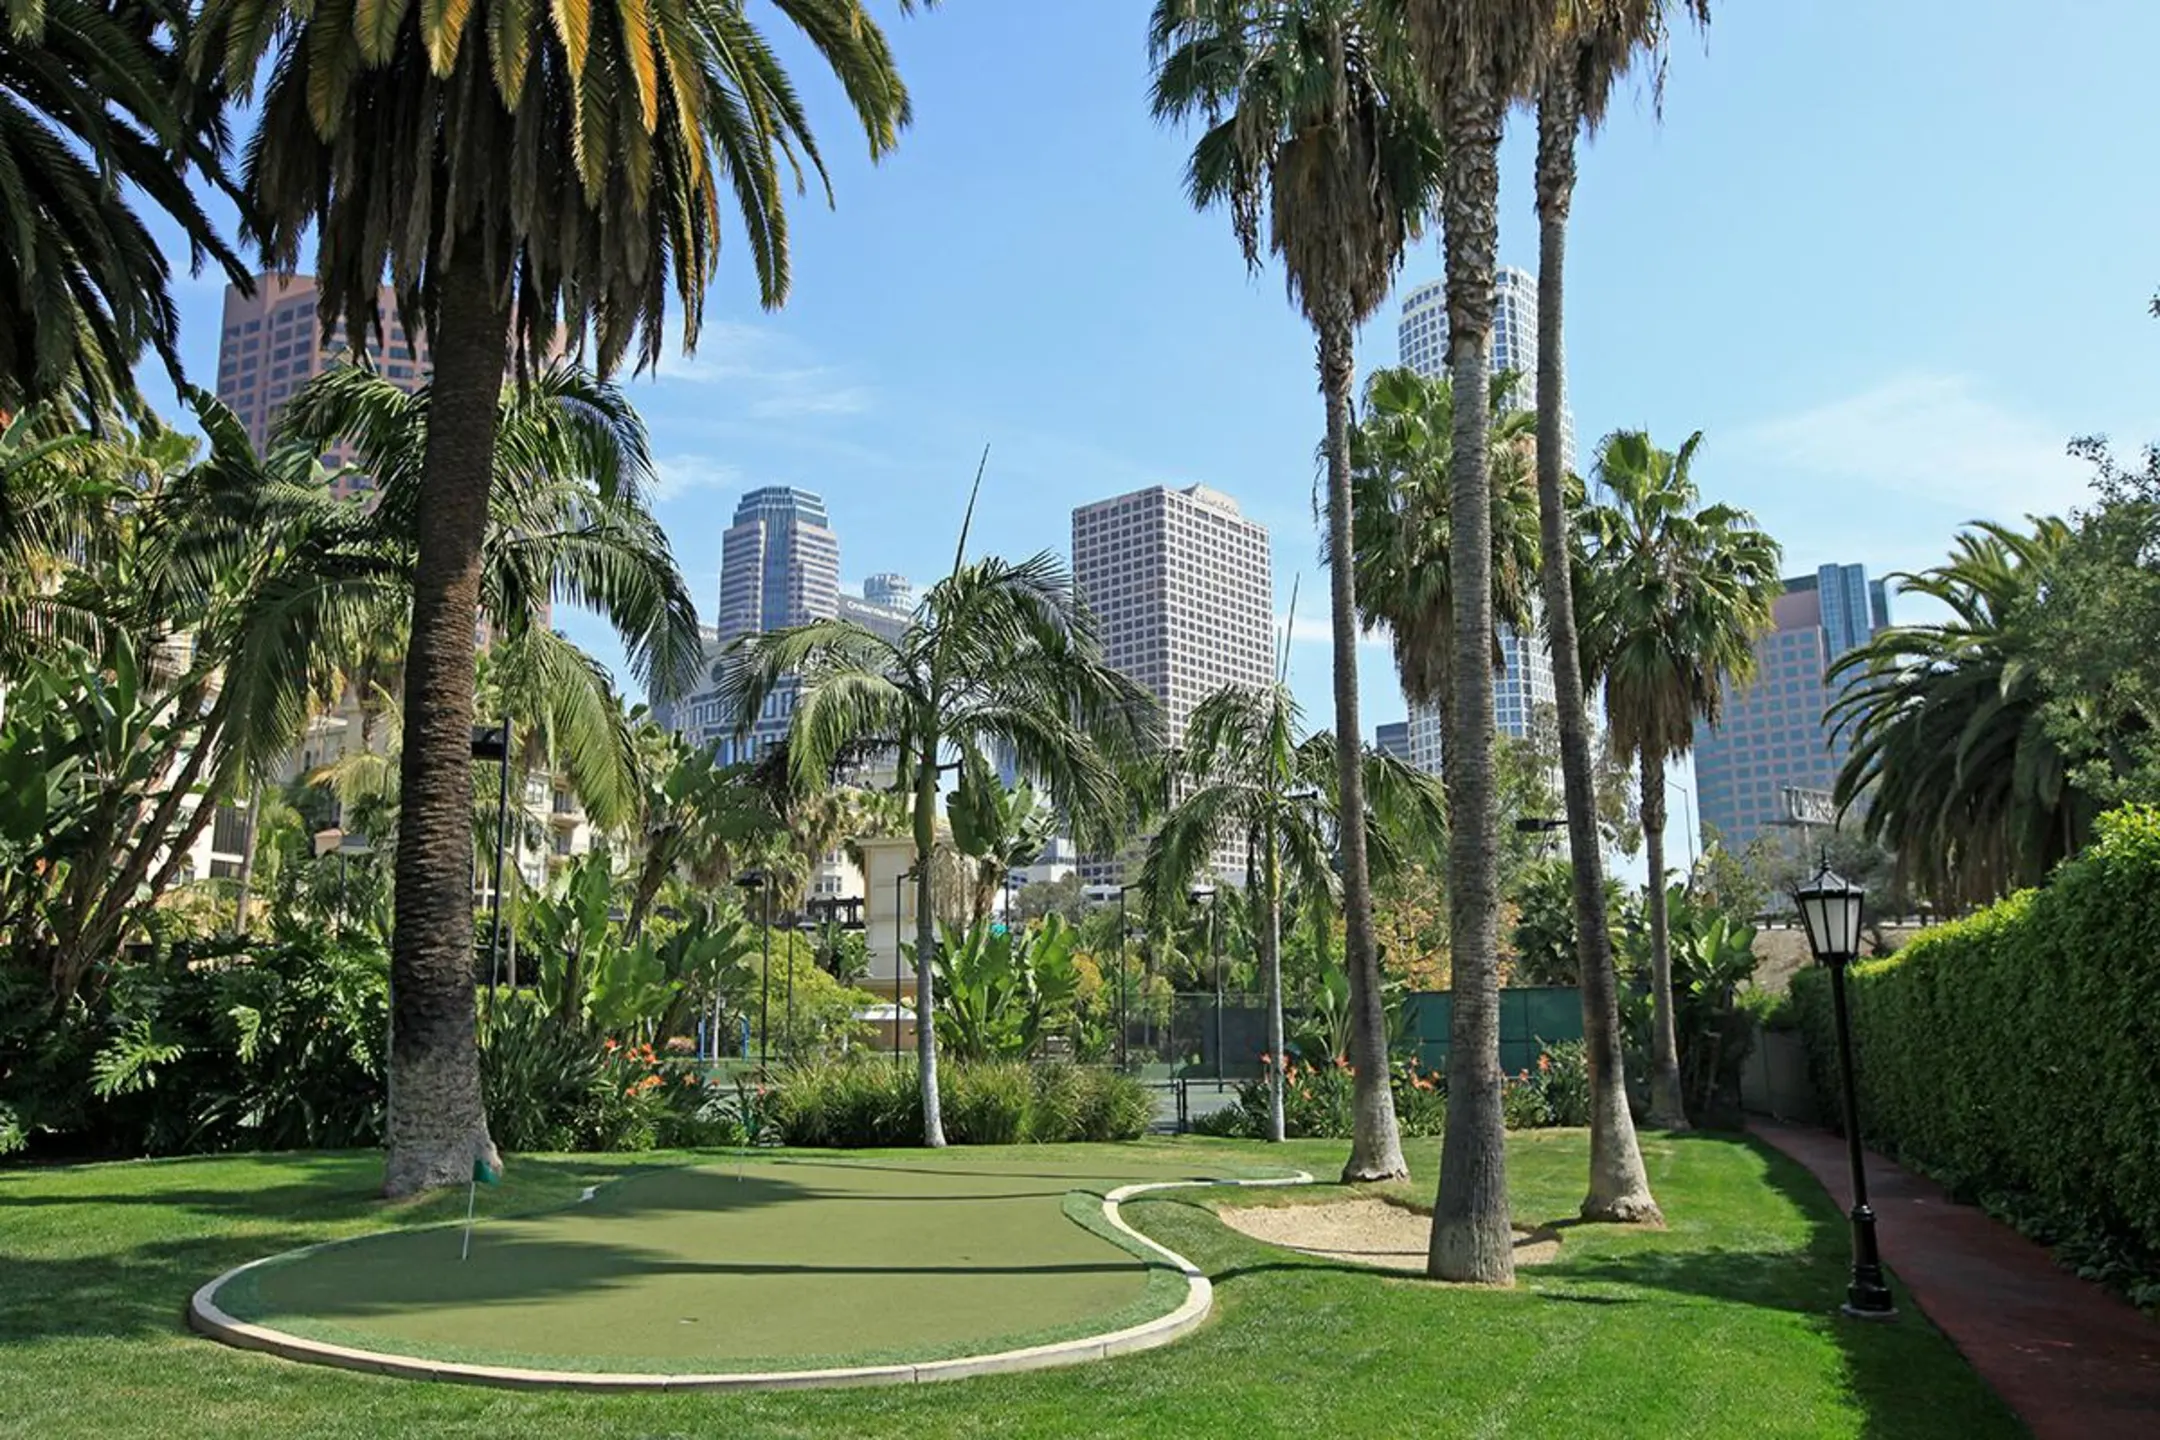 Landscaping - The Medici - Los Angeles, CA